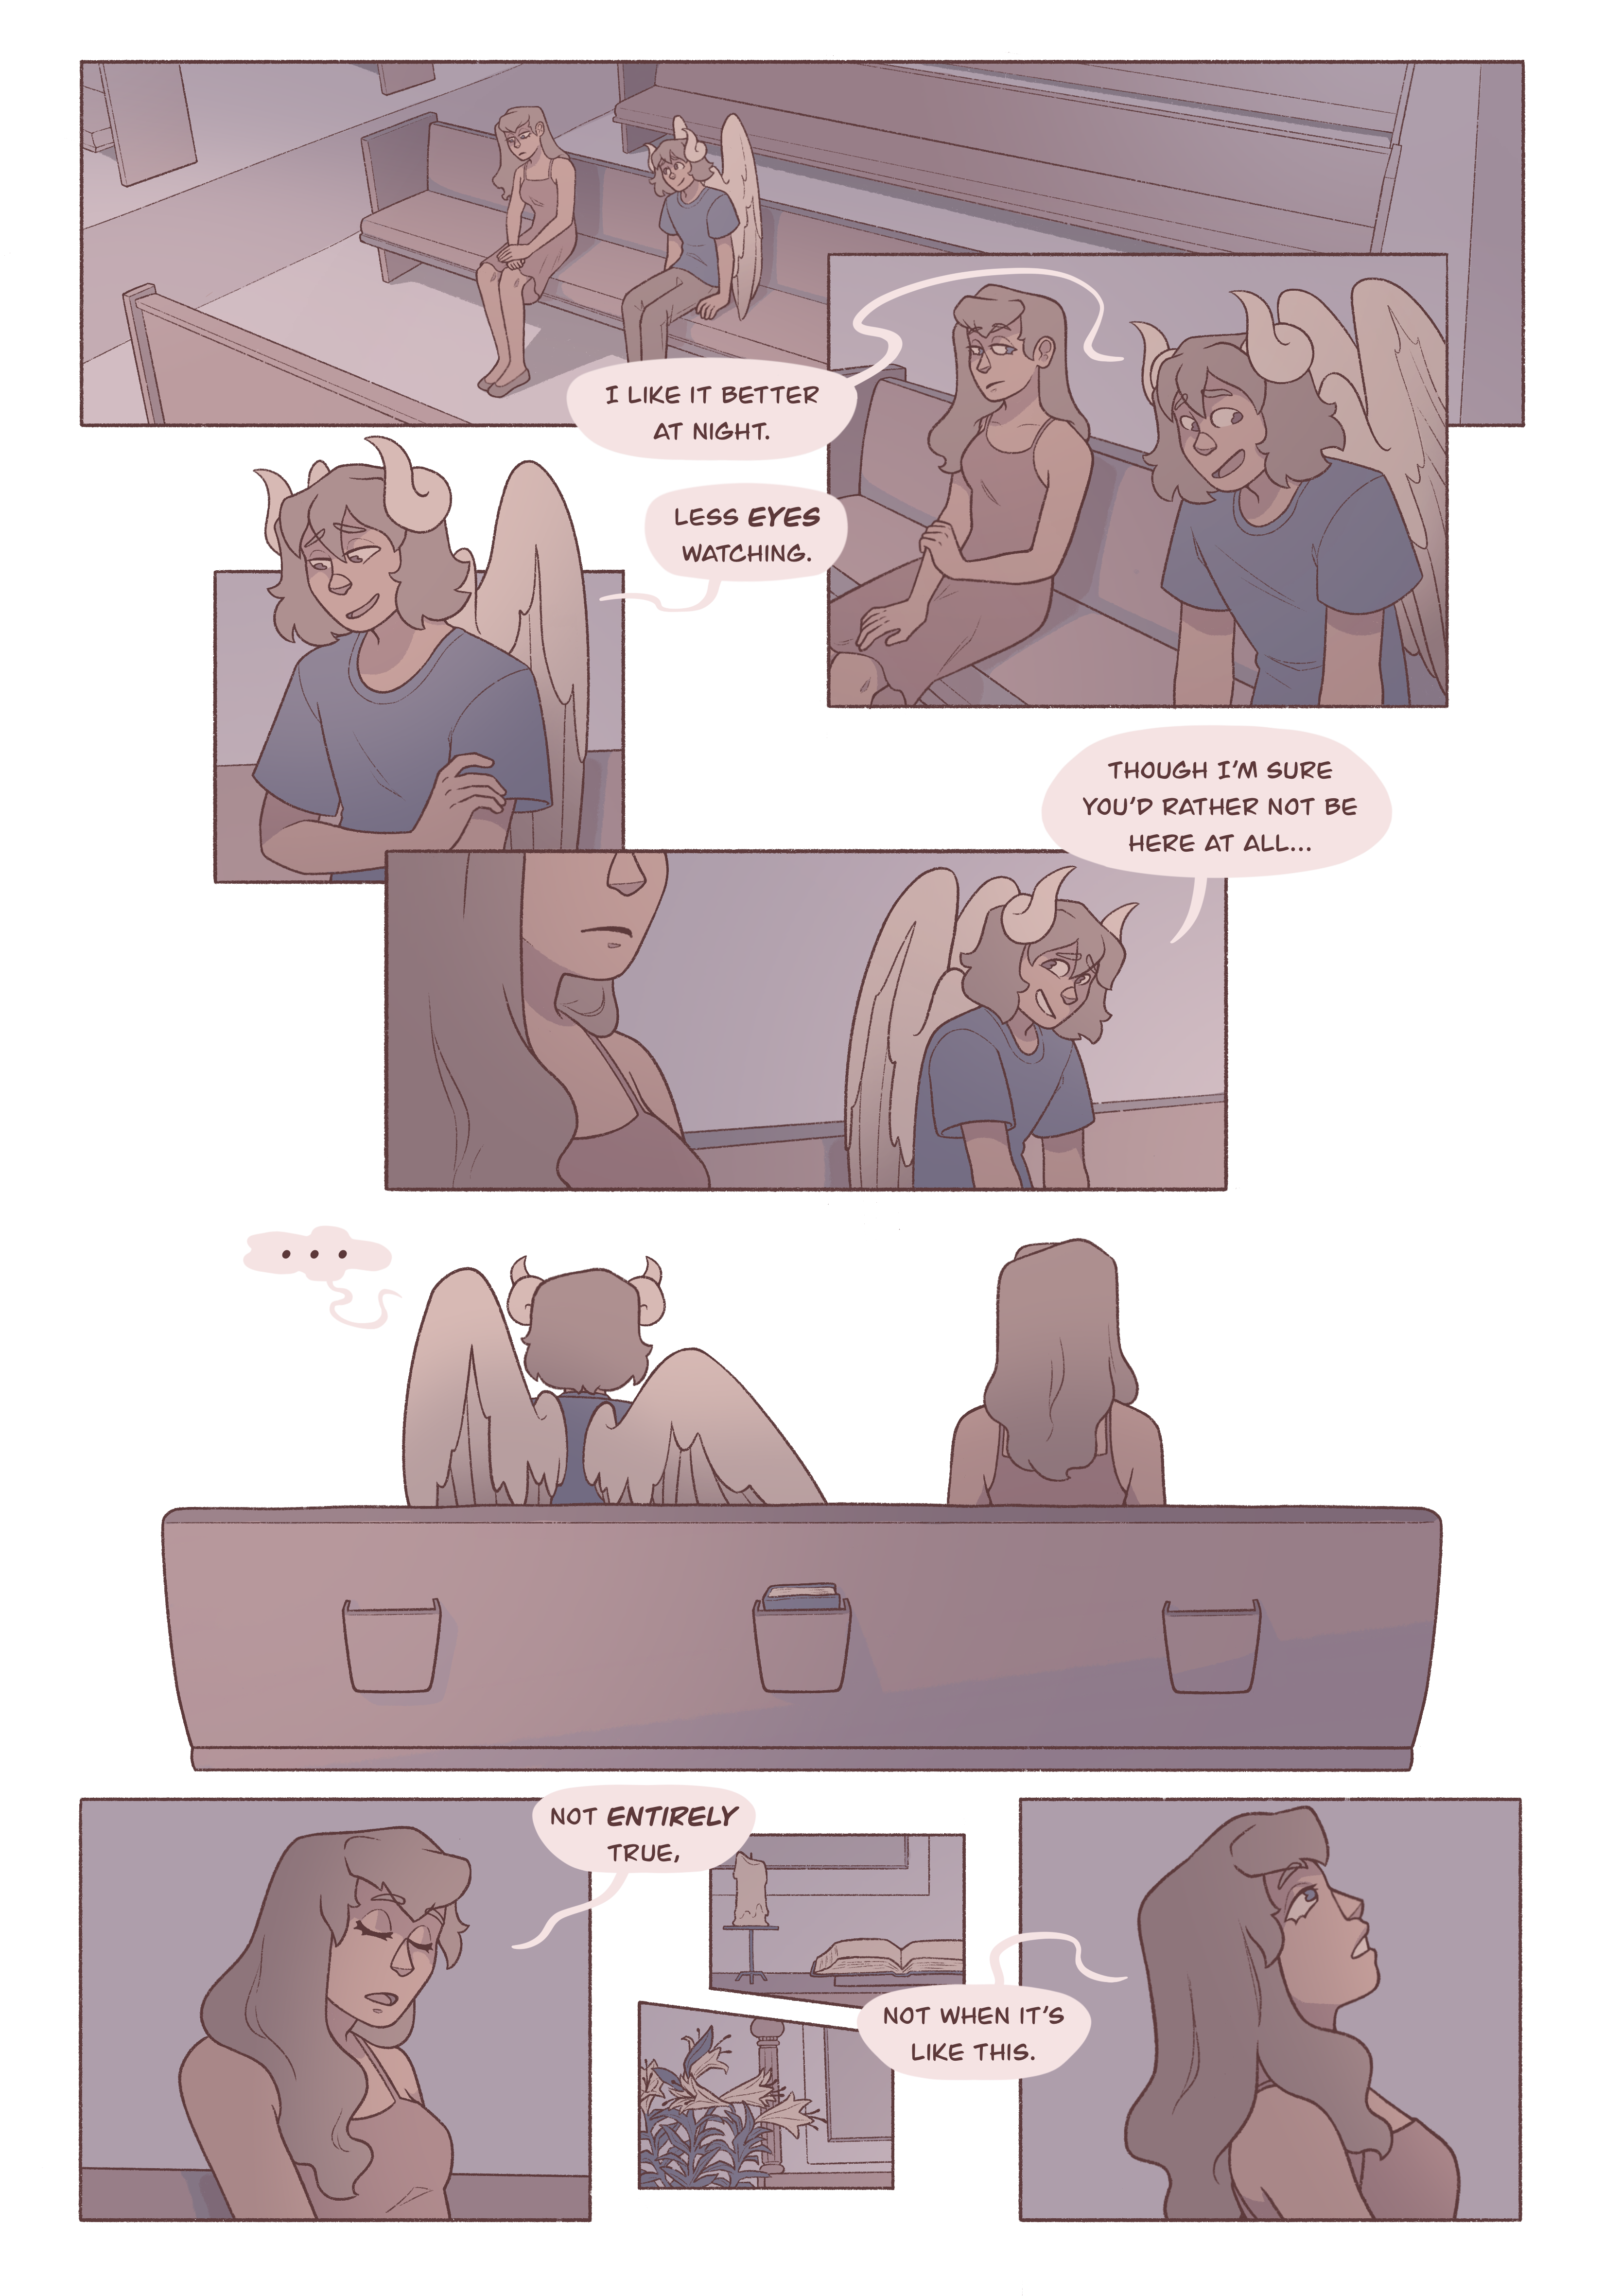 Less Eyes Watching - Page 1